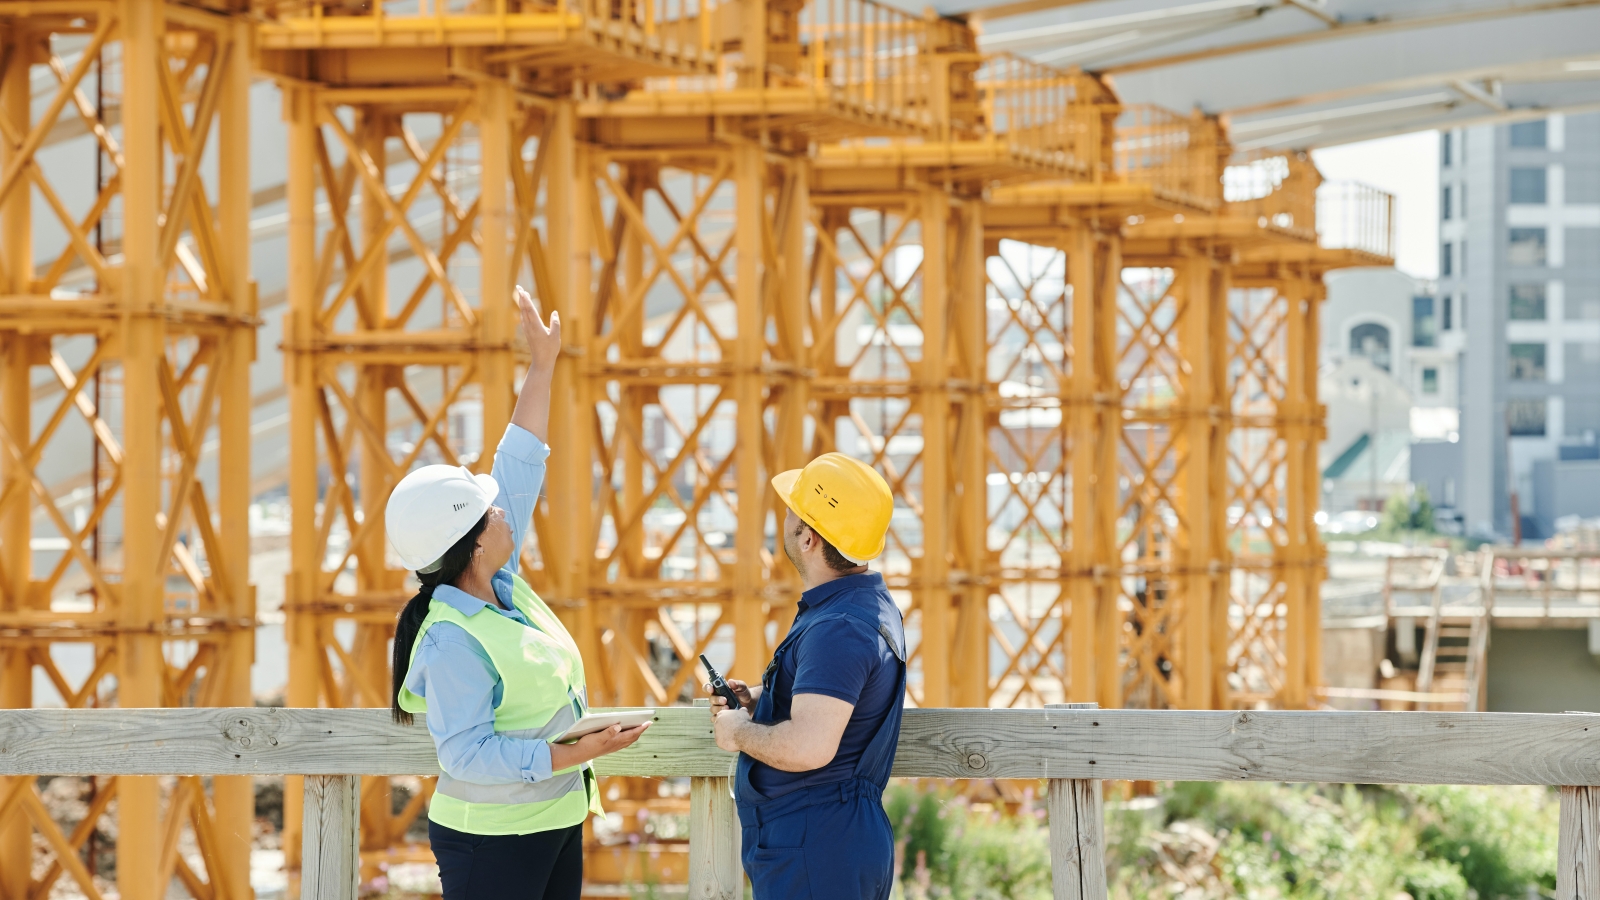 Marketing Tips for Construction Companies